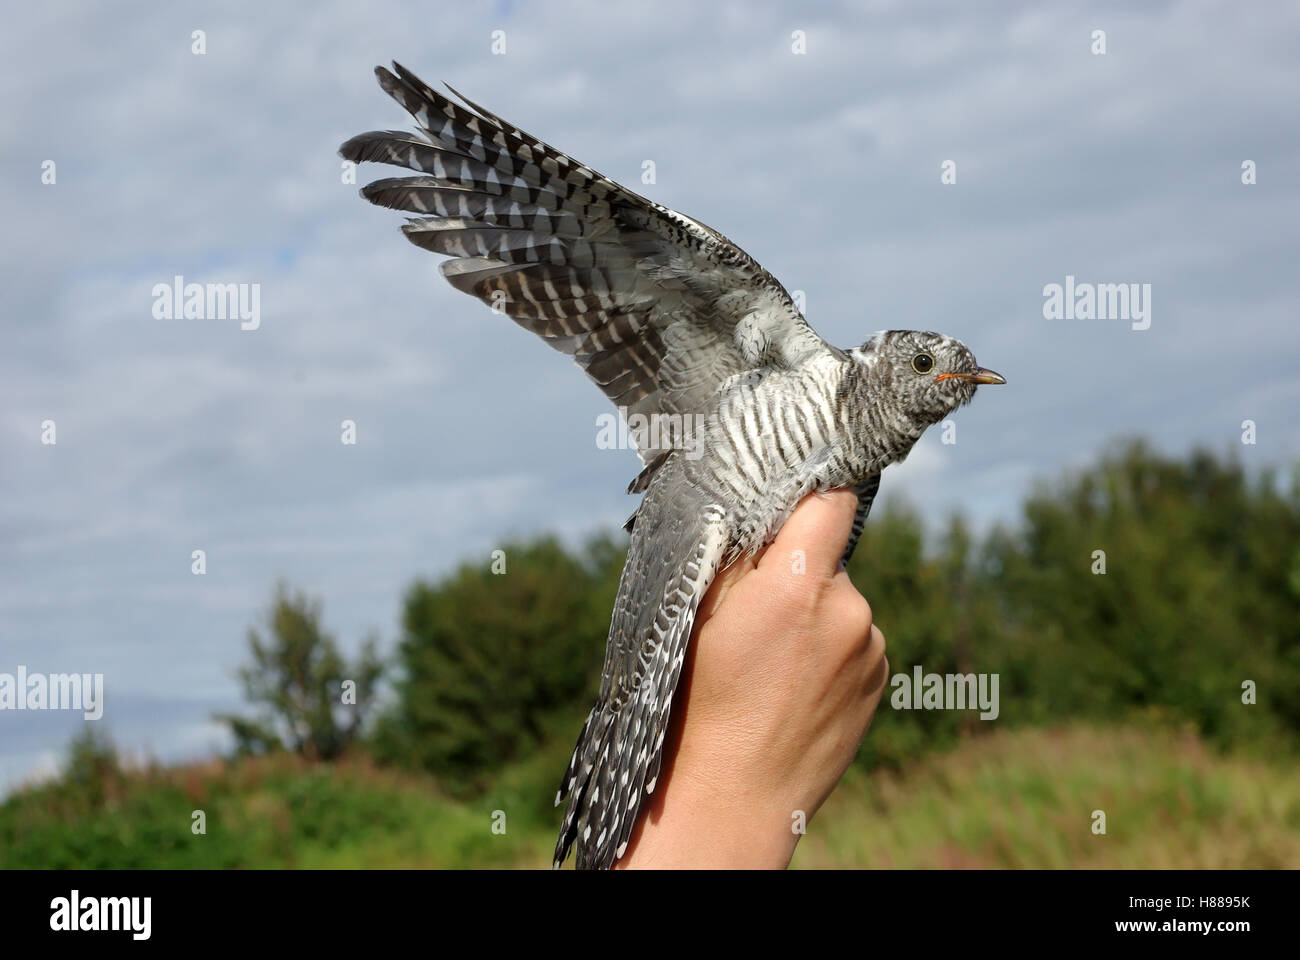 Cuckoo on a hand it is high, against the dark blue sky. Stock Photo